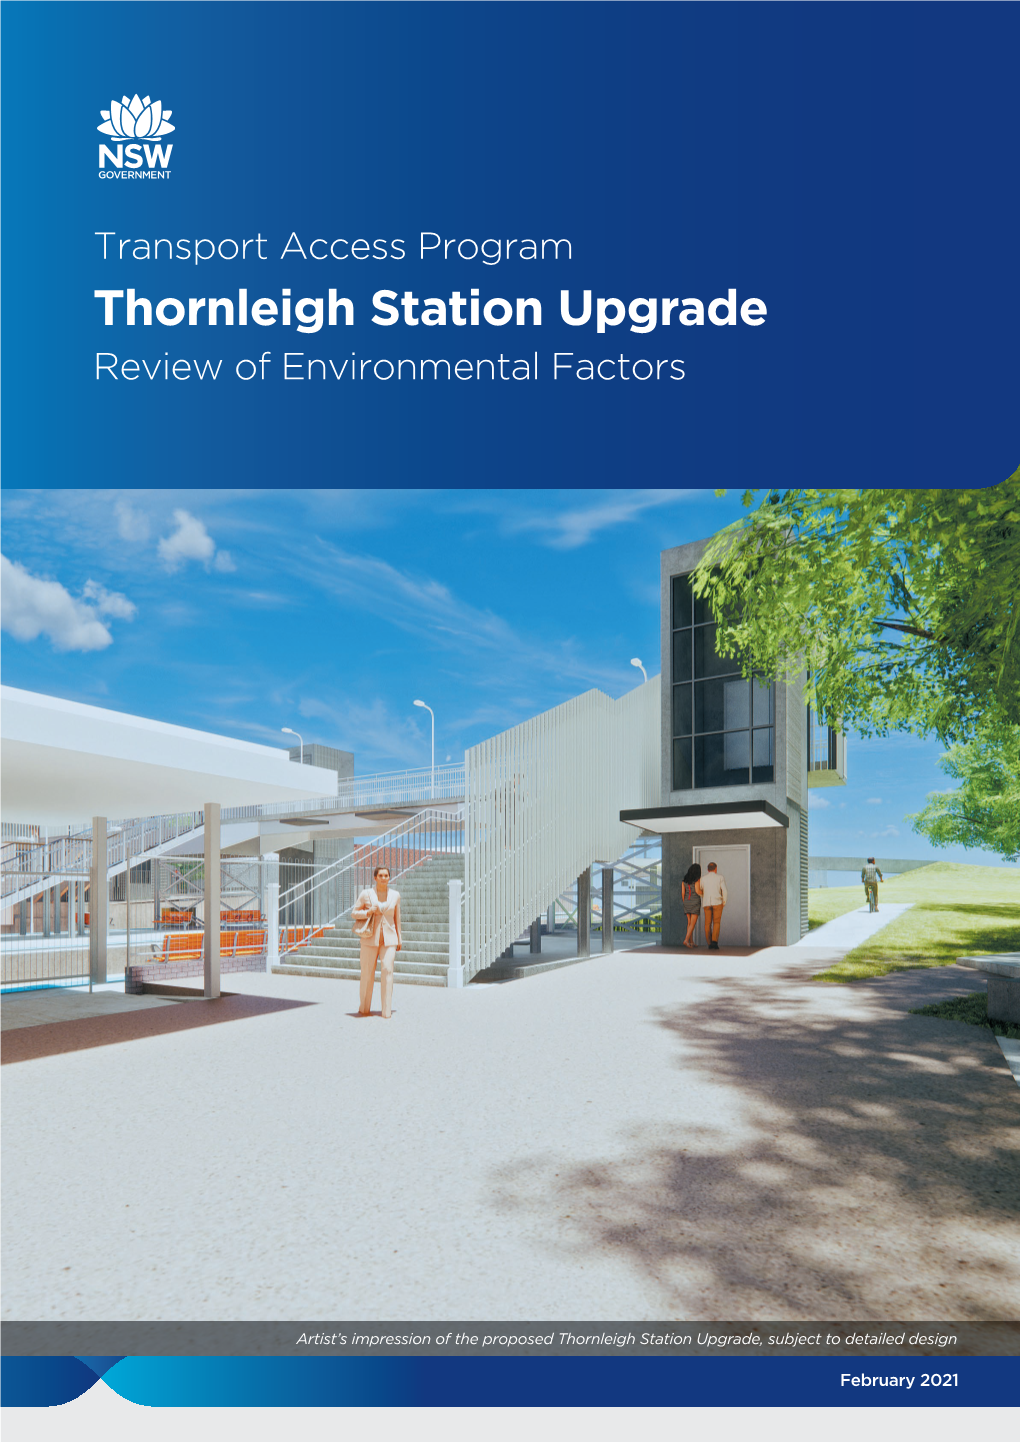 Thornleigh Station Upgrade Review of Environmental Factors